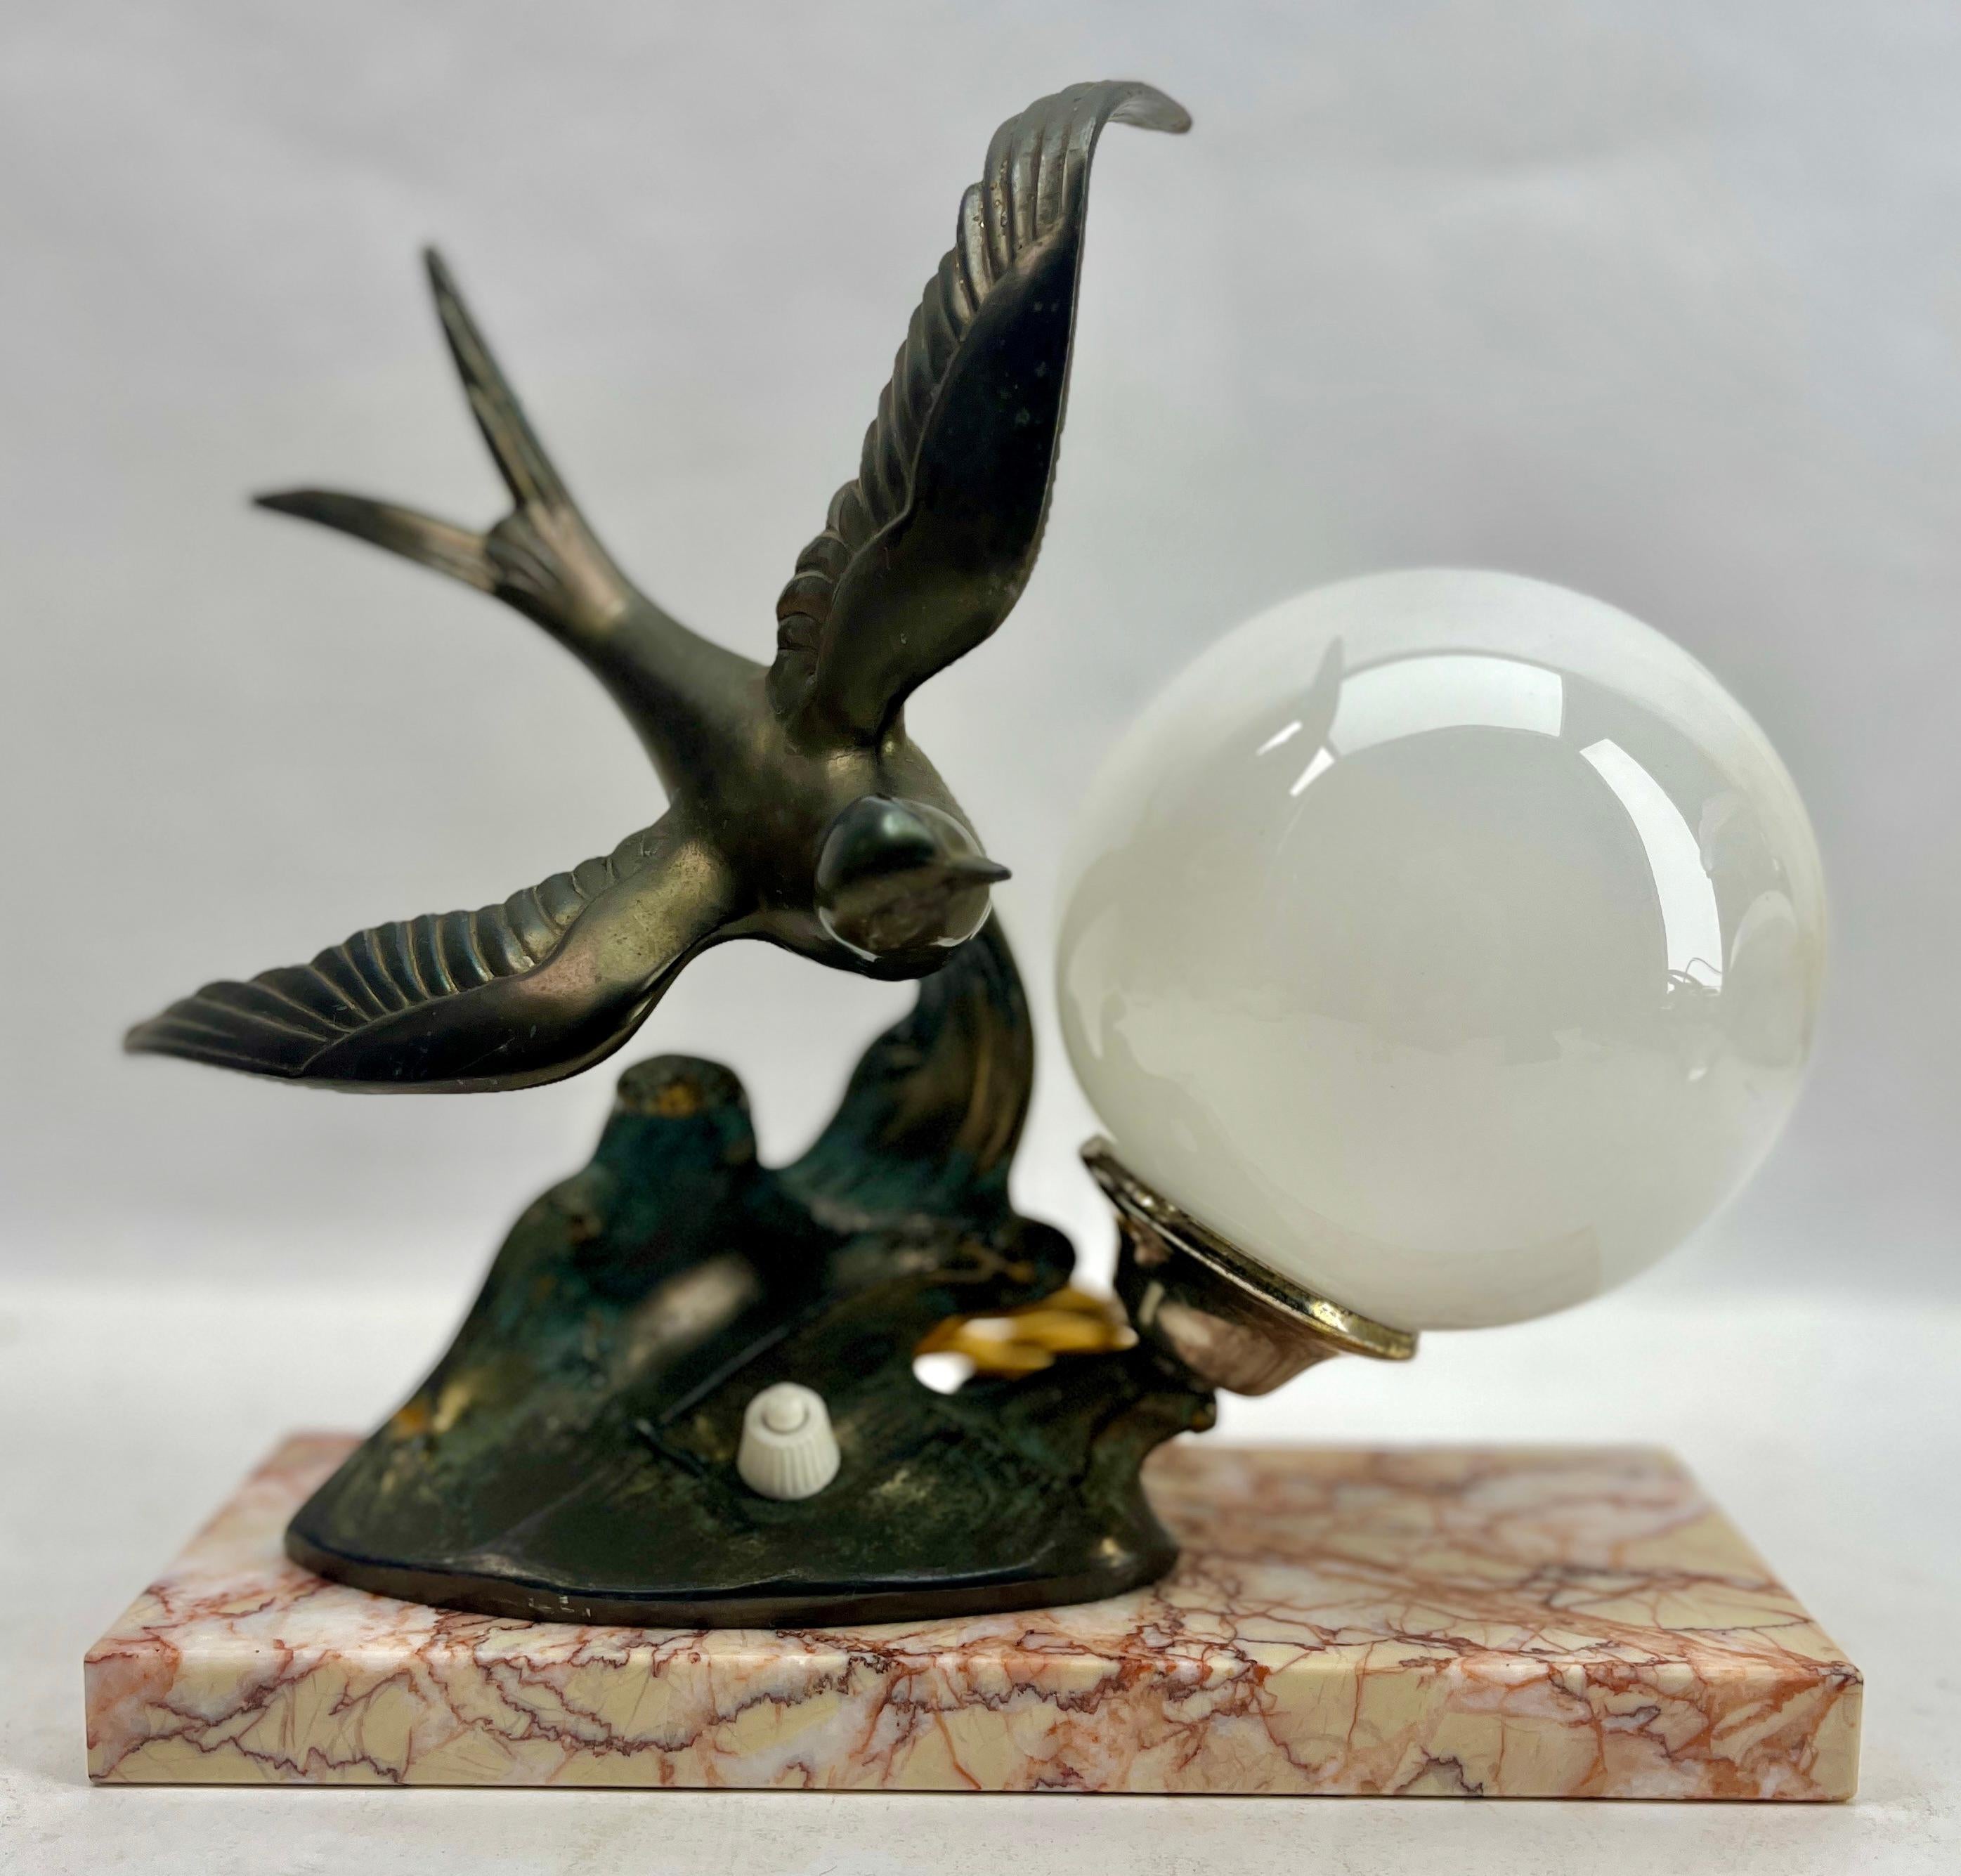 Stunning French Art Deco table lamp Gorgeous glass globe shade.
With Spelter Bird motif. Sitting on a marble base. 
In excellent condition and in full working order. 
Rewiring and Fitting E14
Originel Patina on all Parts
The piece is in excellent